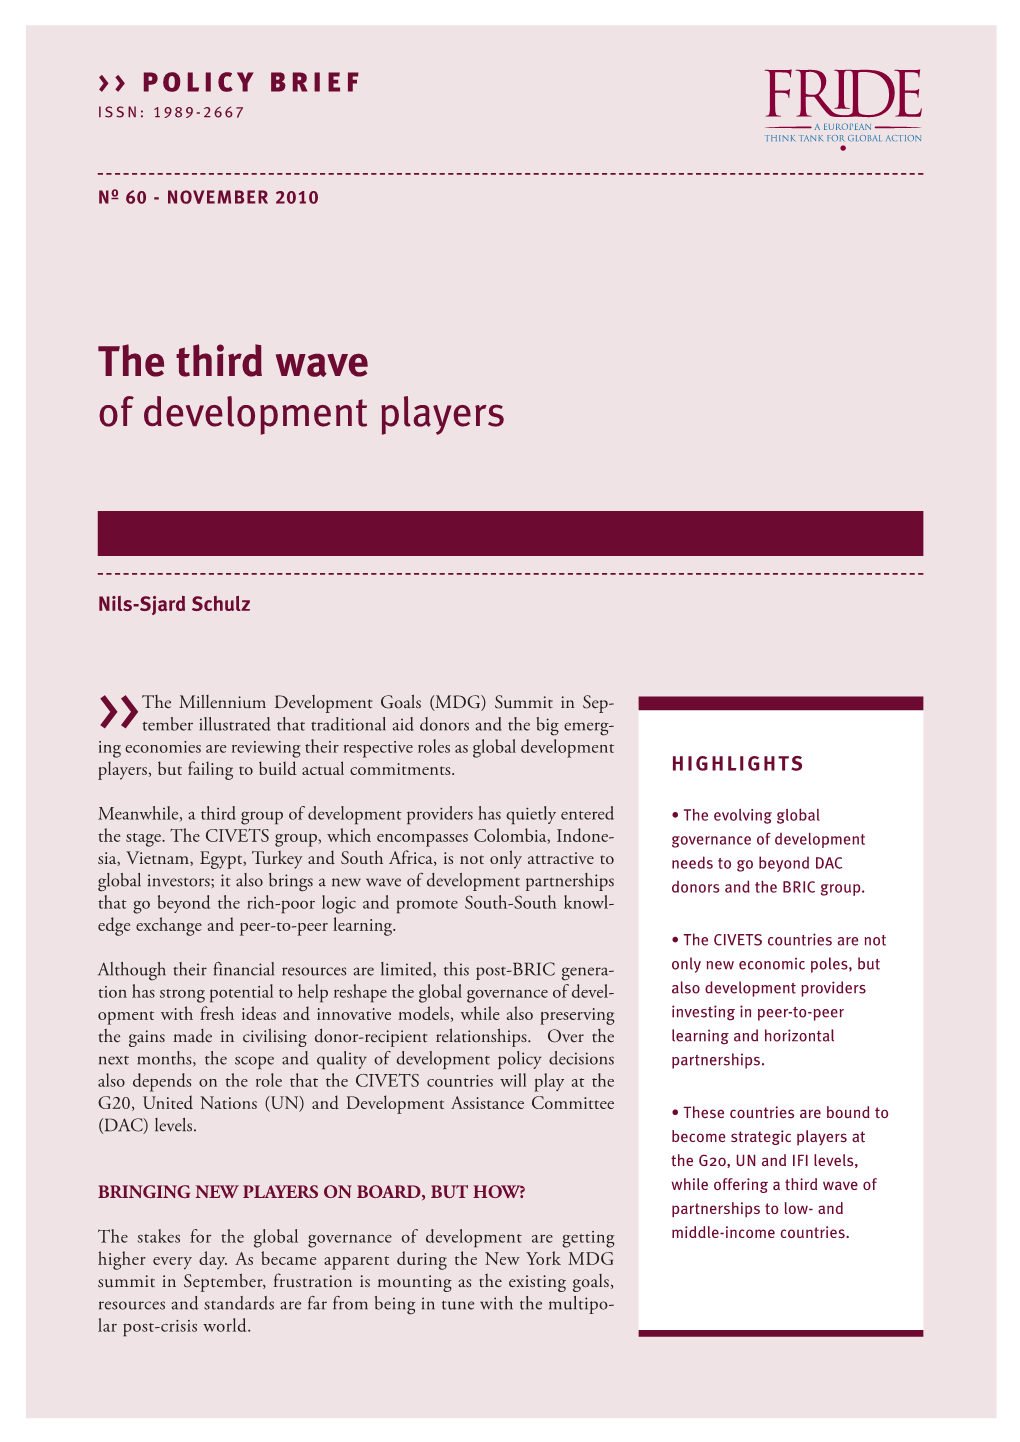 The Third Wave of Development Players